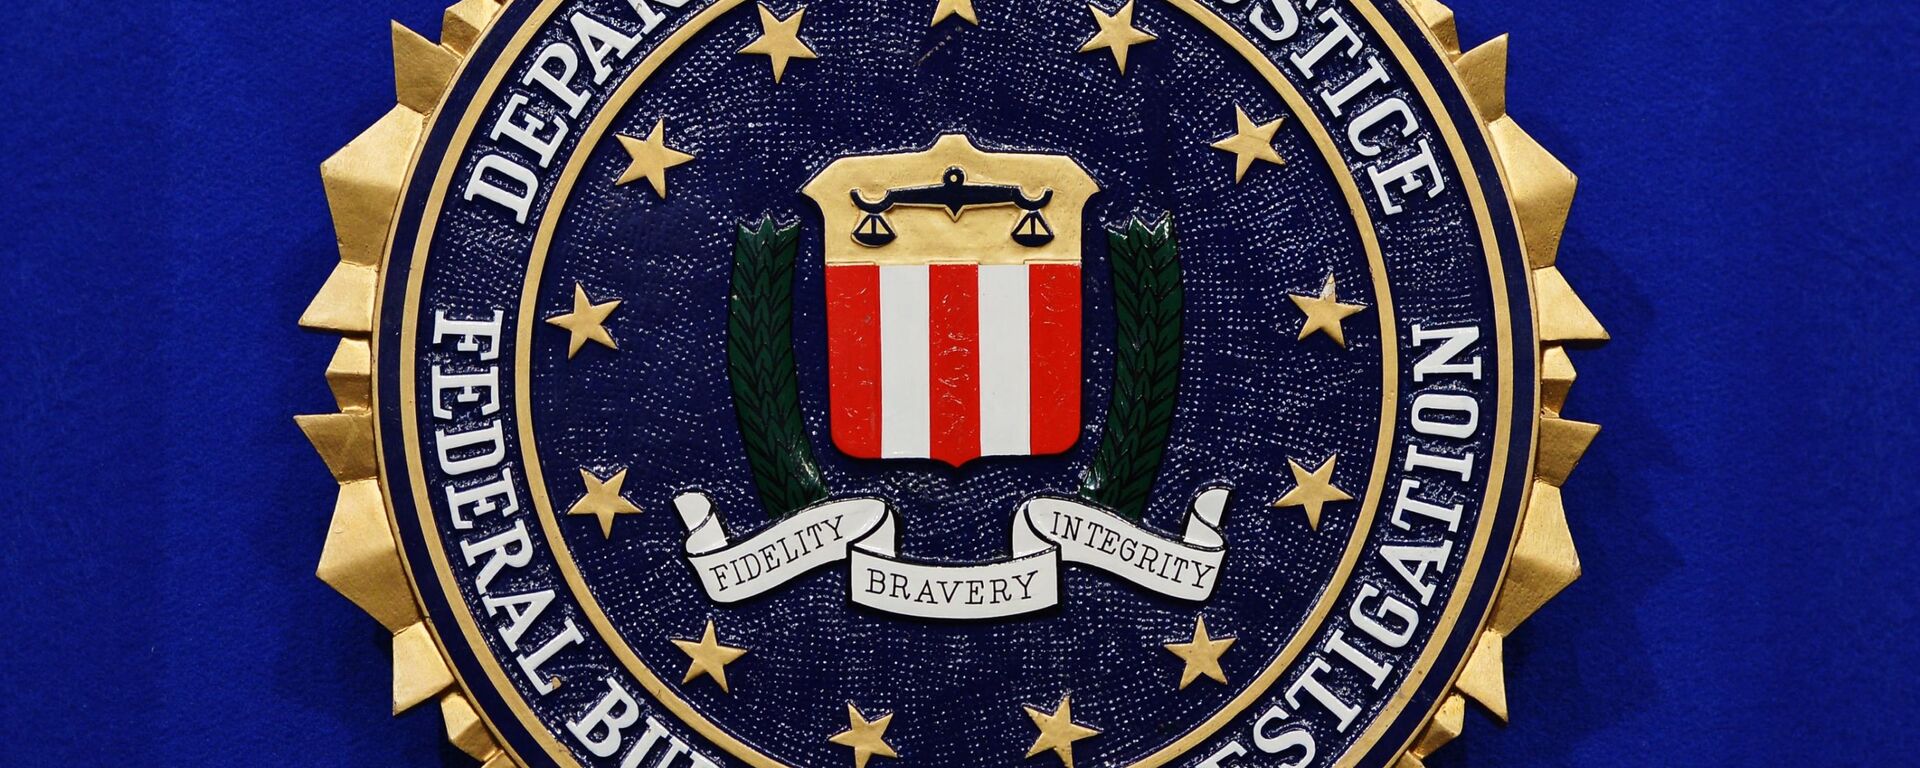 The Federal Bureau of Investigation (FBI) seal is seen on the lectern following a press conference announcing the FBI's 499th and 500th additions to the Ten Most Wanted Fugitives list on June 17, 2013 at the Newseum in Washington, DC.  - Sputnik International, 1920, 18.10.2021